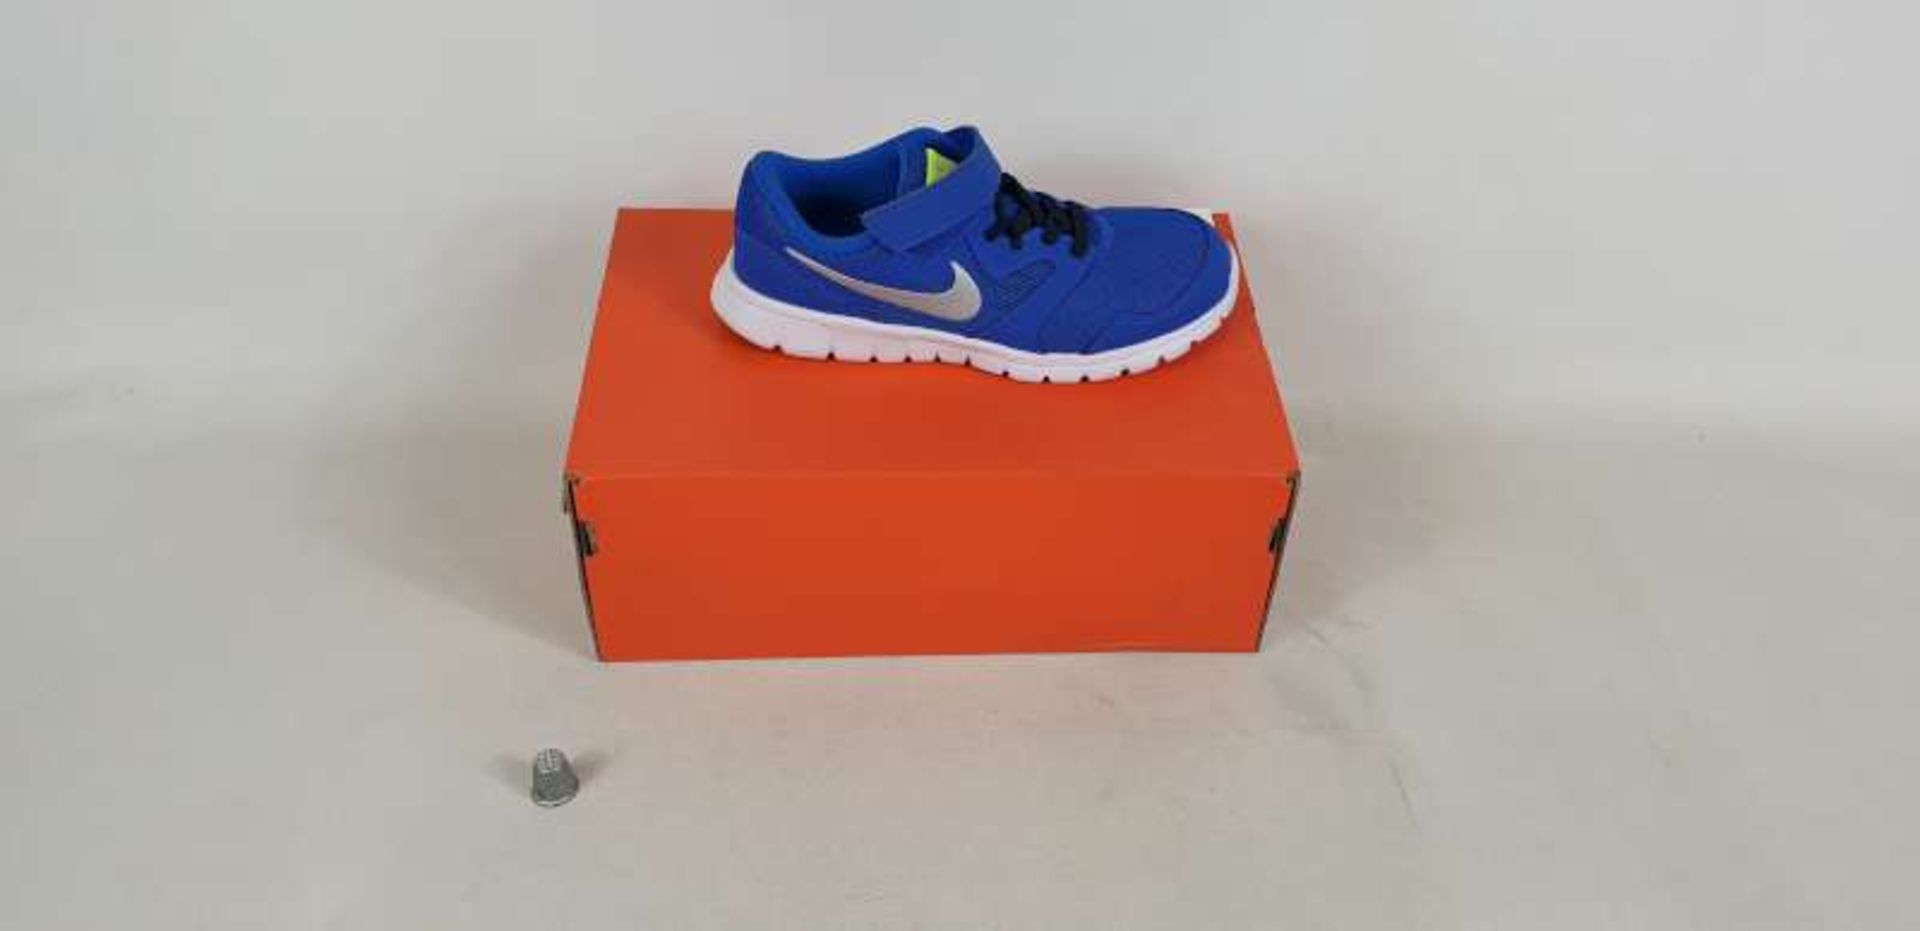 7 X BRAND NEW BOXED CHILDRENS NIKE FLEX EXPERIENCE 3 TRAINERS SIZE 4.5